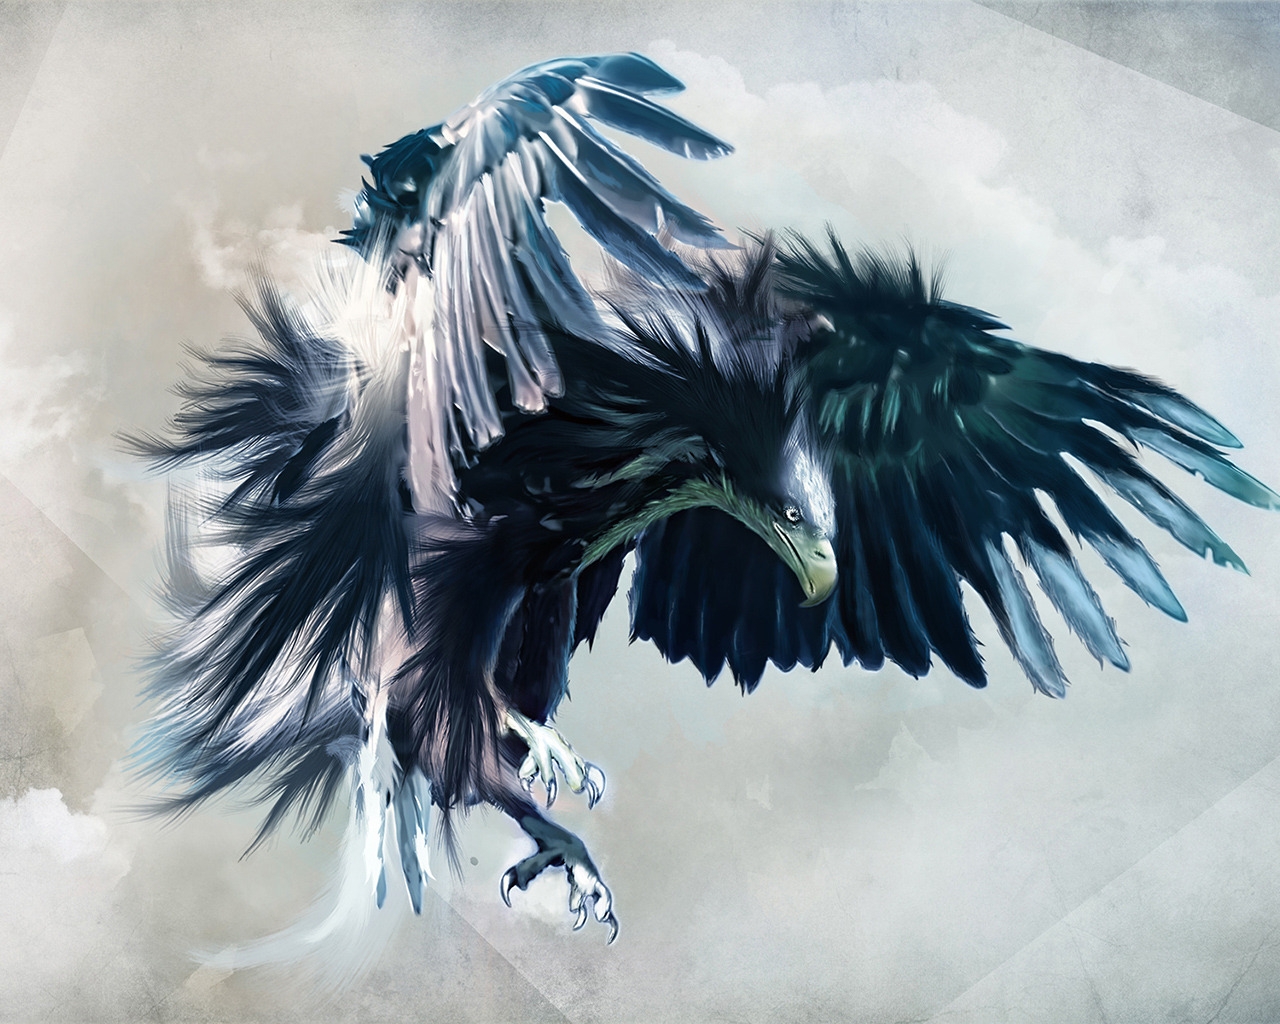 Amazing Eagle for 1280 x 1024 resolution